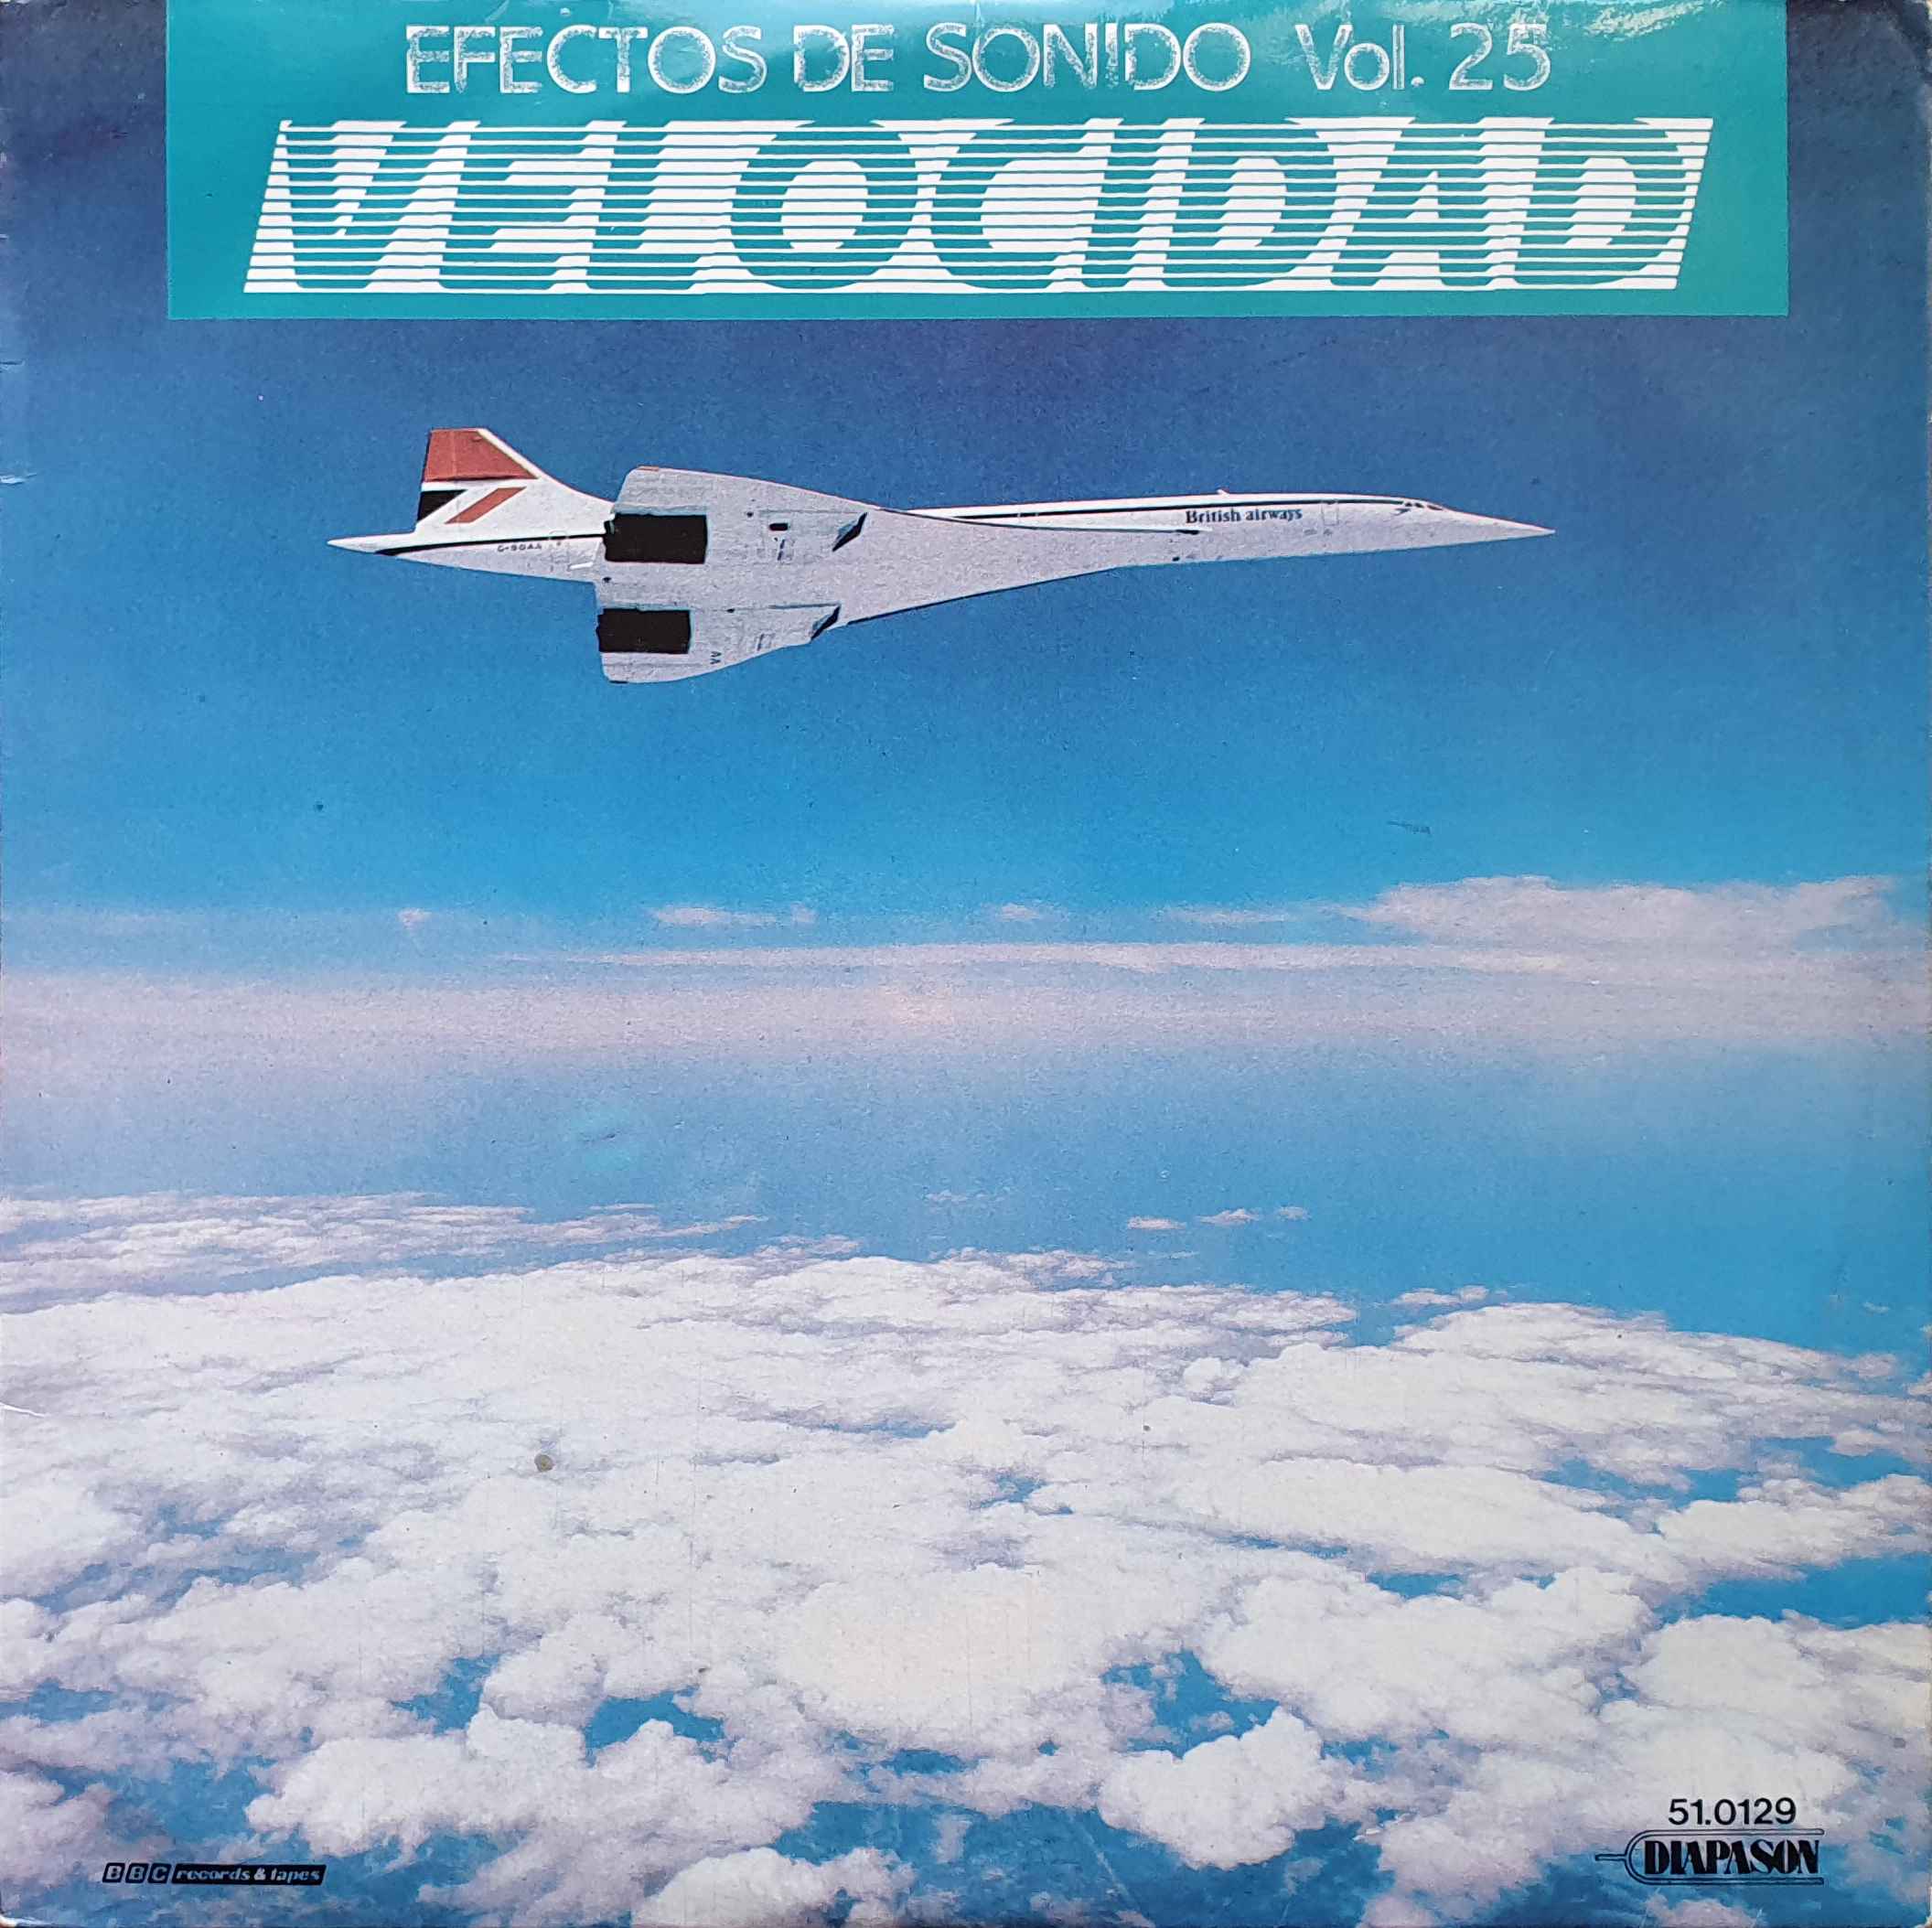 Picture of 51.0129 Efectos de sonido Vol. 25 - Velocidad (Spanish import) by artist Various from the BBC albums - Records and Tapes library